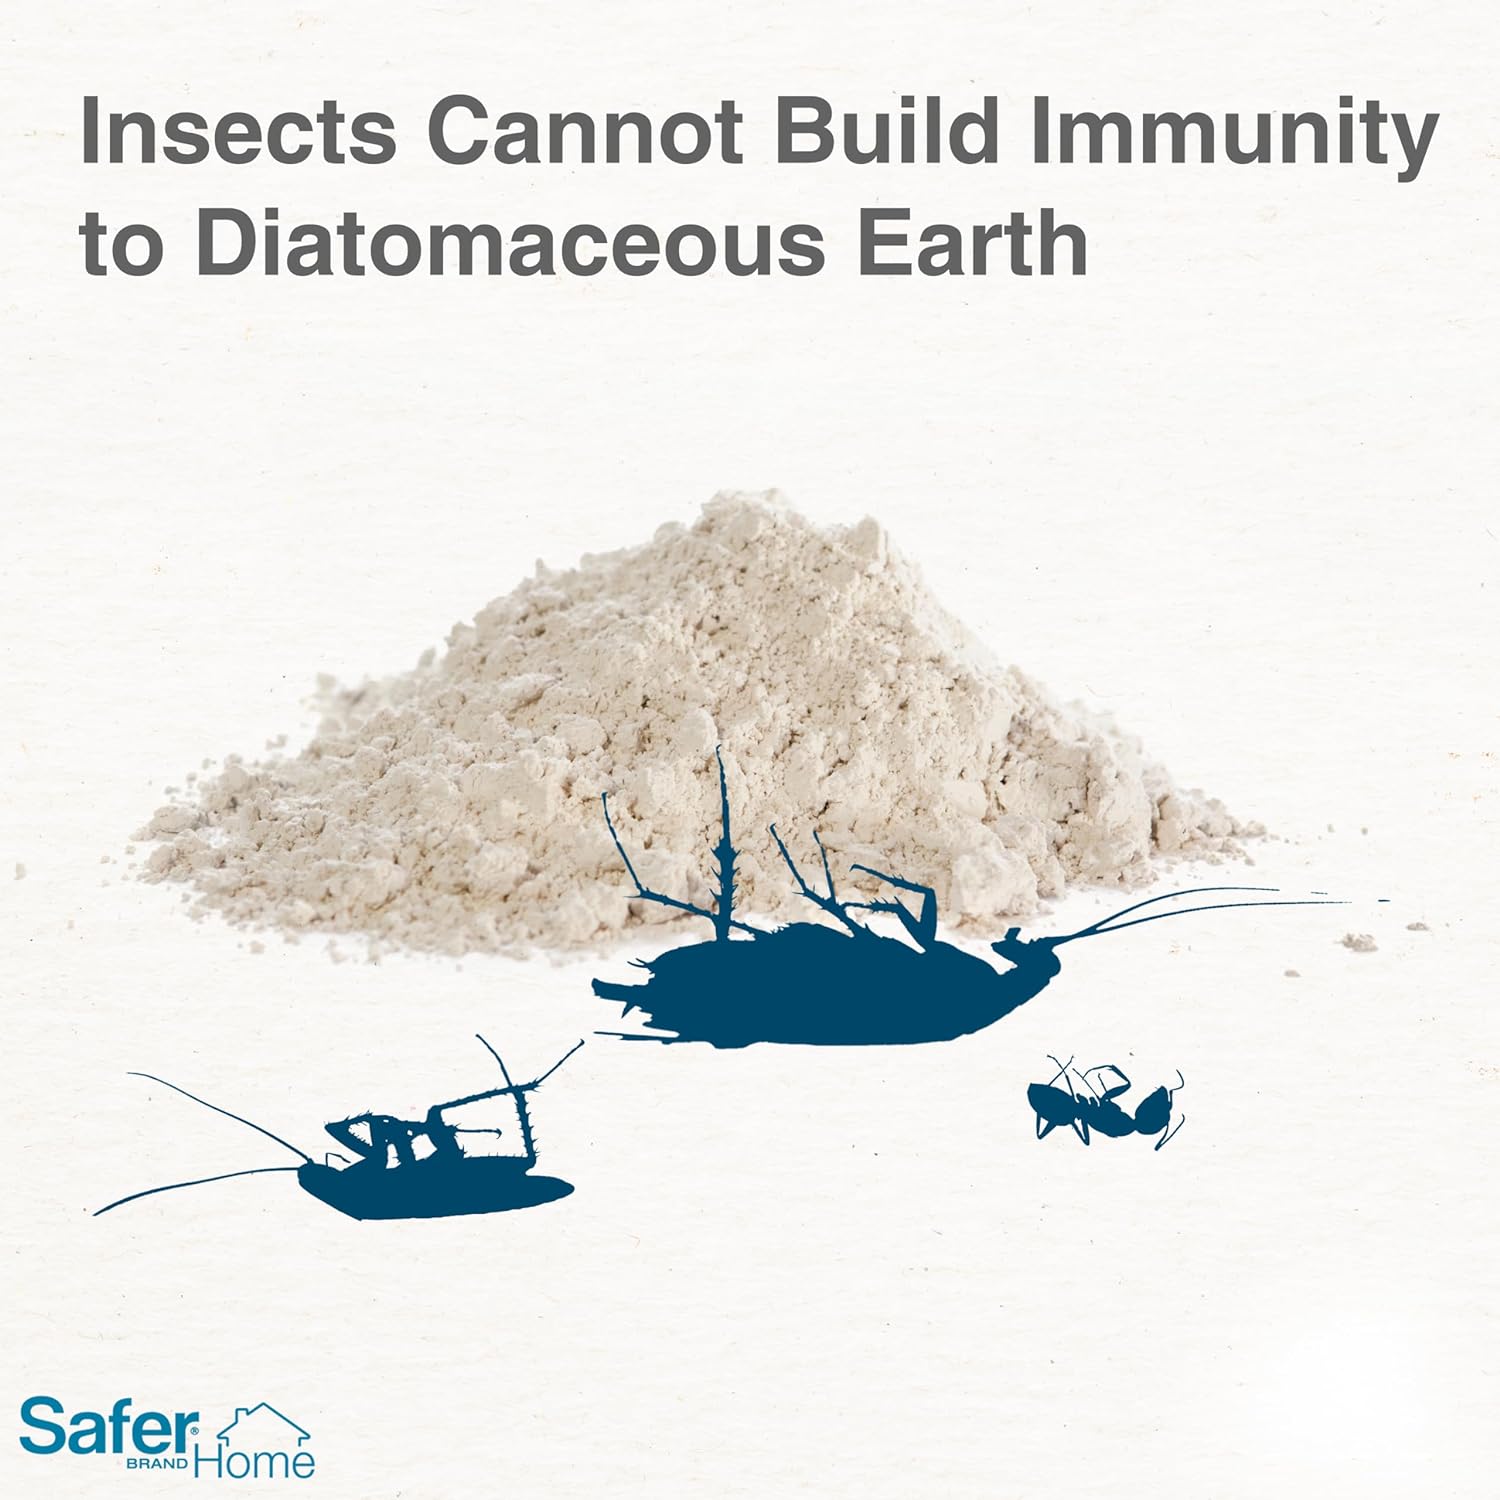 Safer Diatomaceous Earth Ant & Crawling Insect Killer, 4 lb Bag